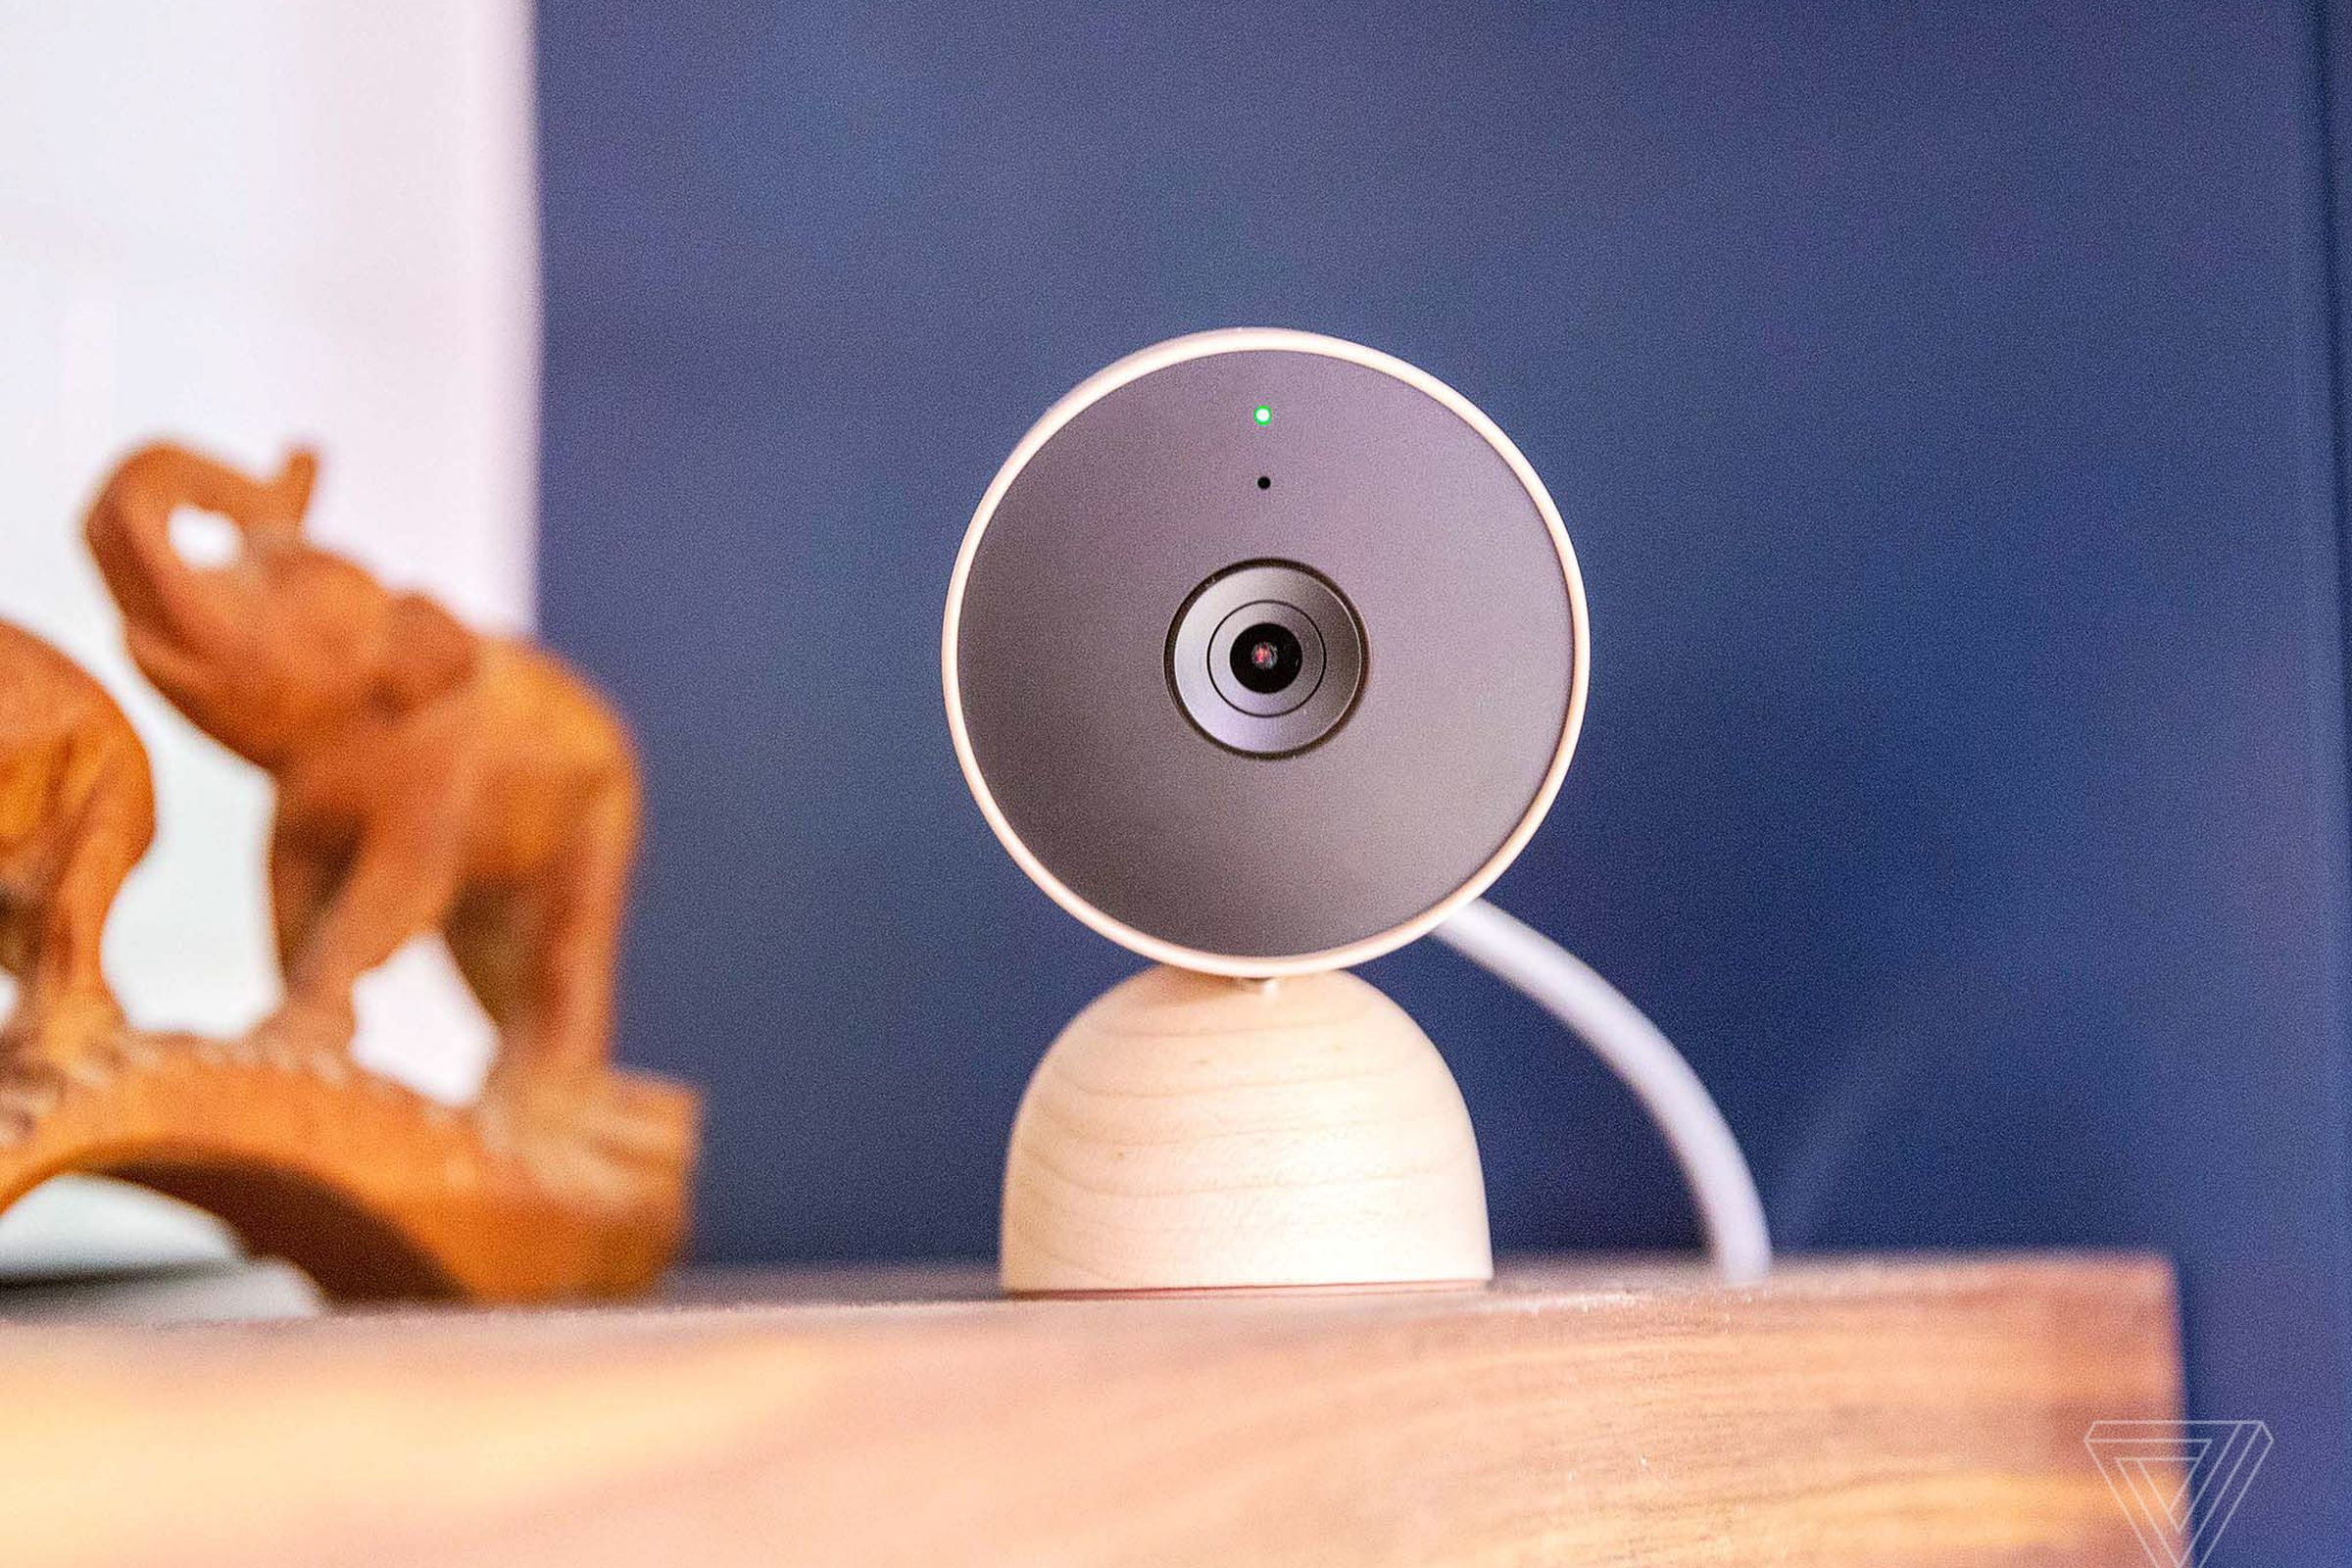 The new Google Nest Cam is a wired, indoor-only camera with free smart alerts for people, pets, and vehicles.